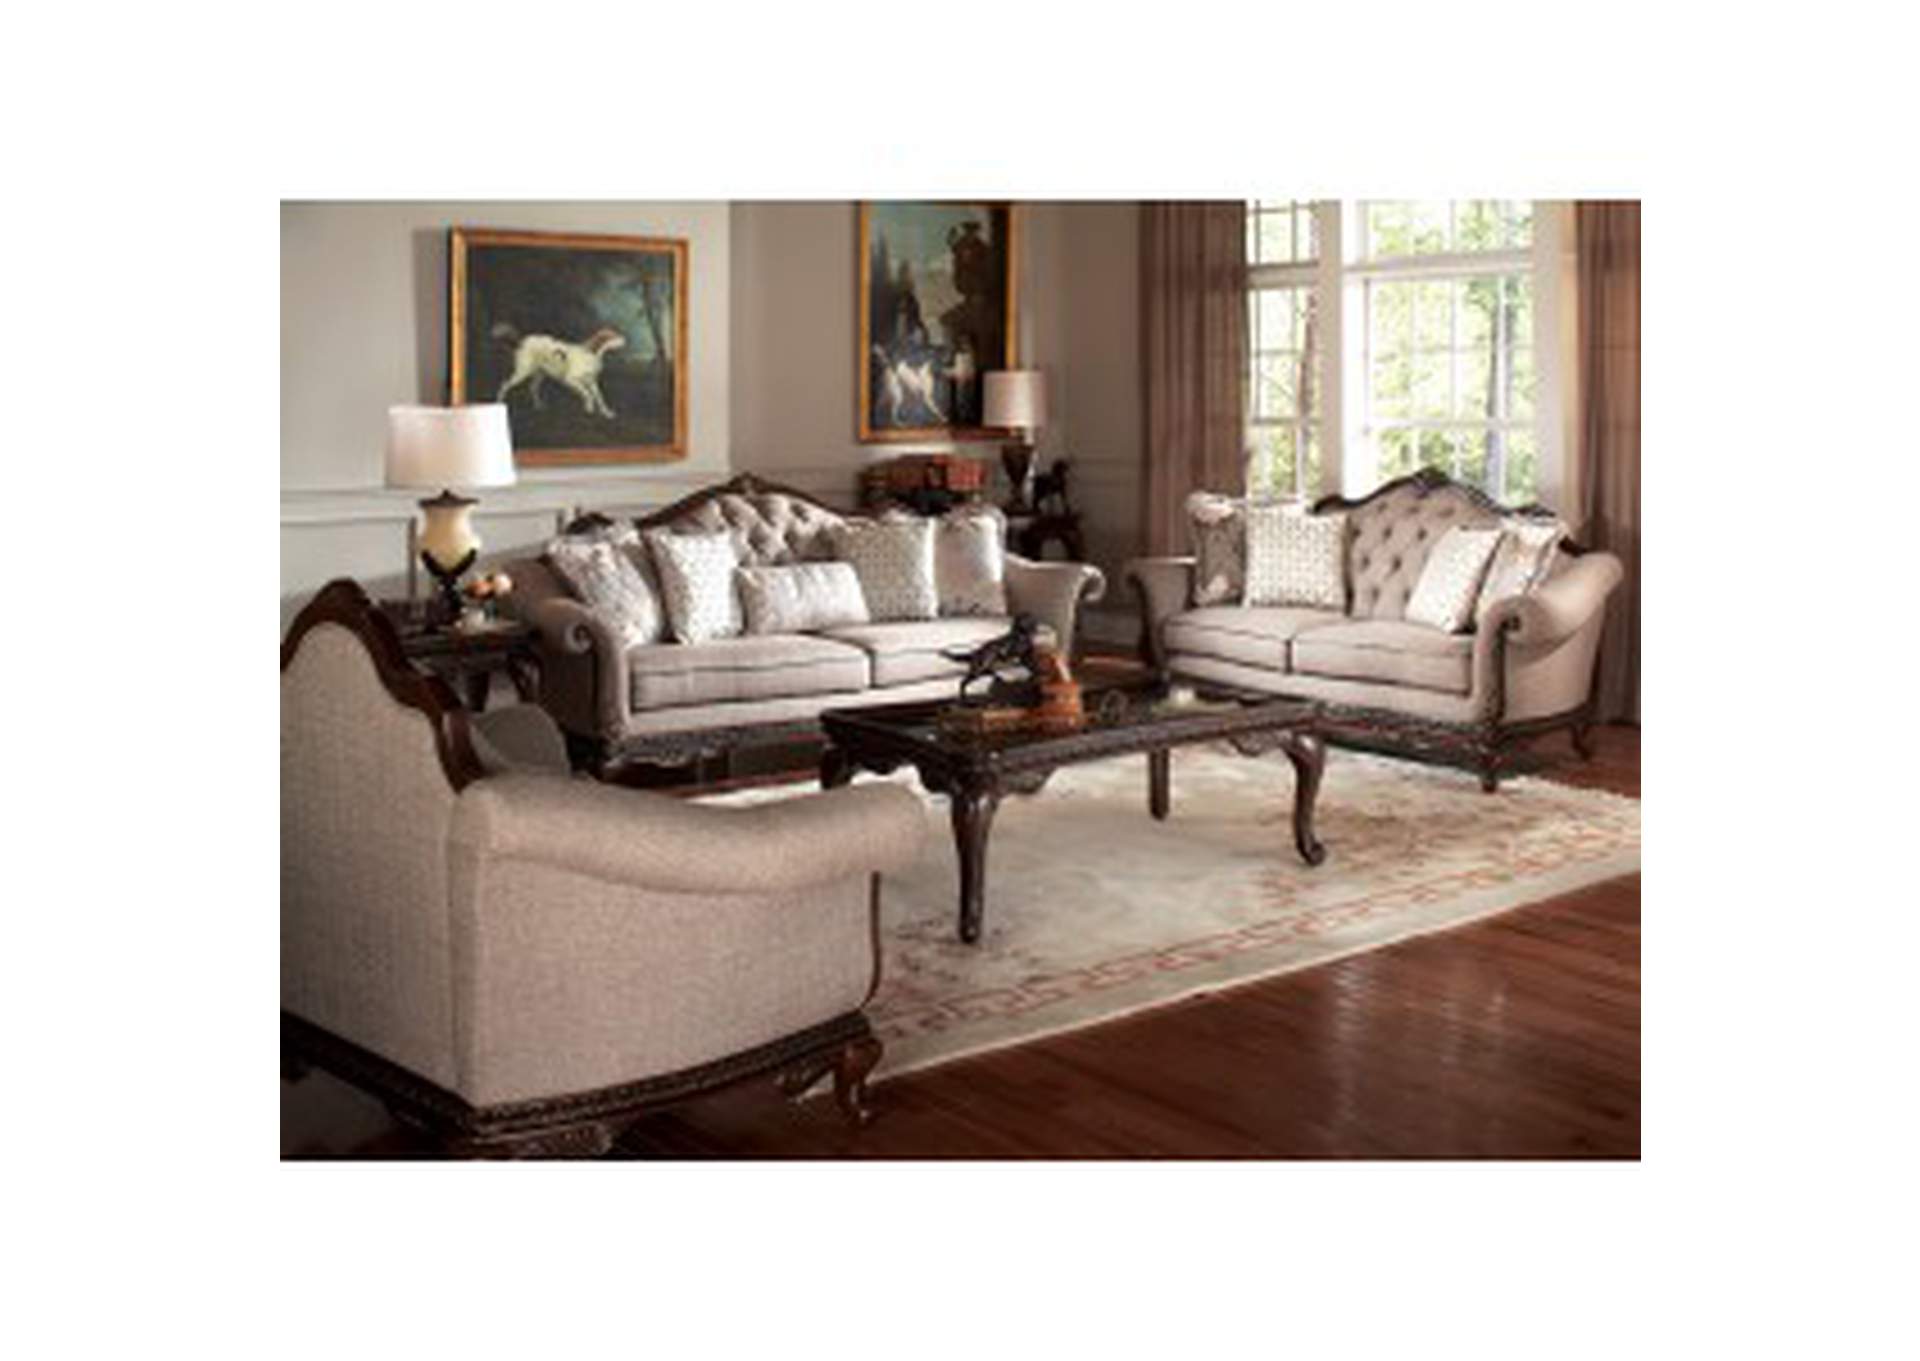 Bonaventure Park Sofa With 4 Square And 1 Kidney Pillows,Homelegance